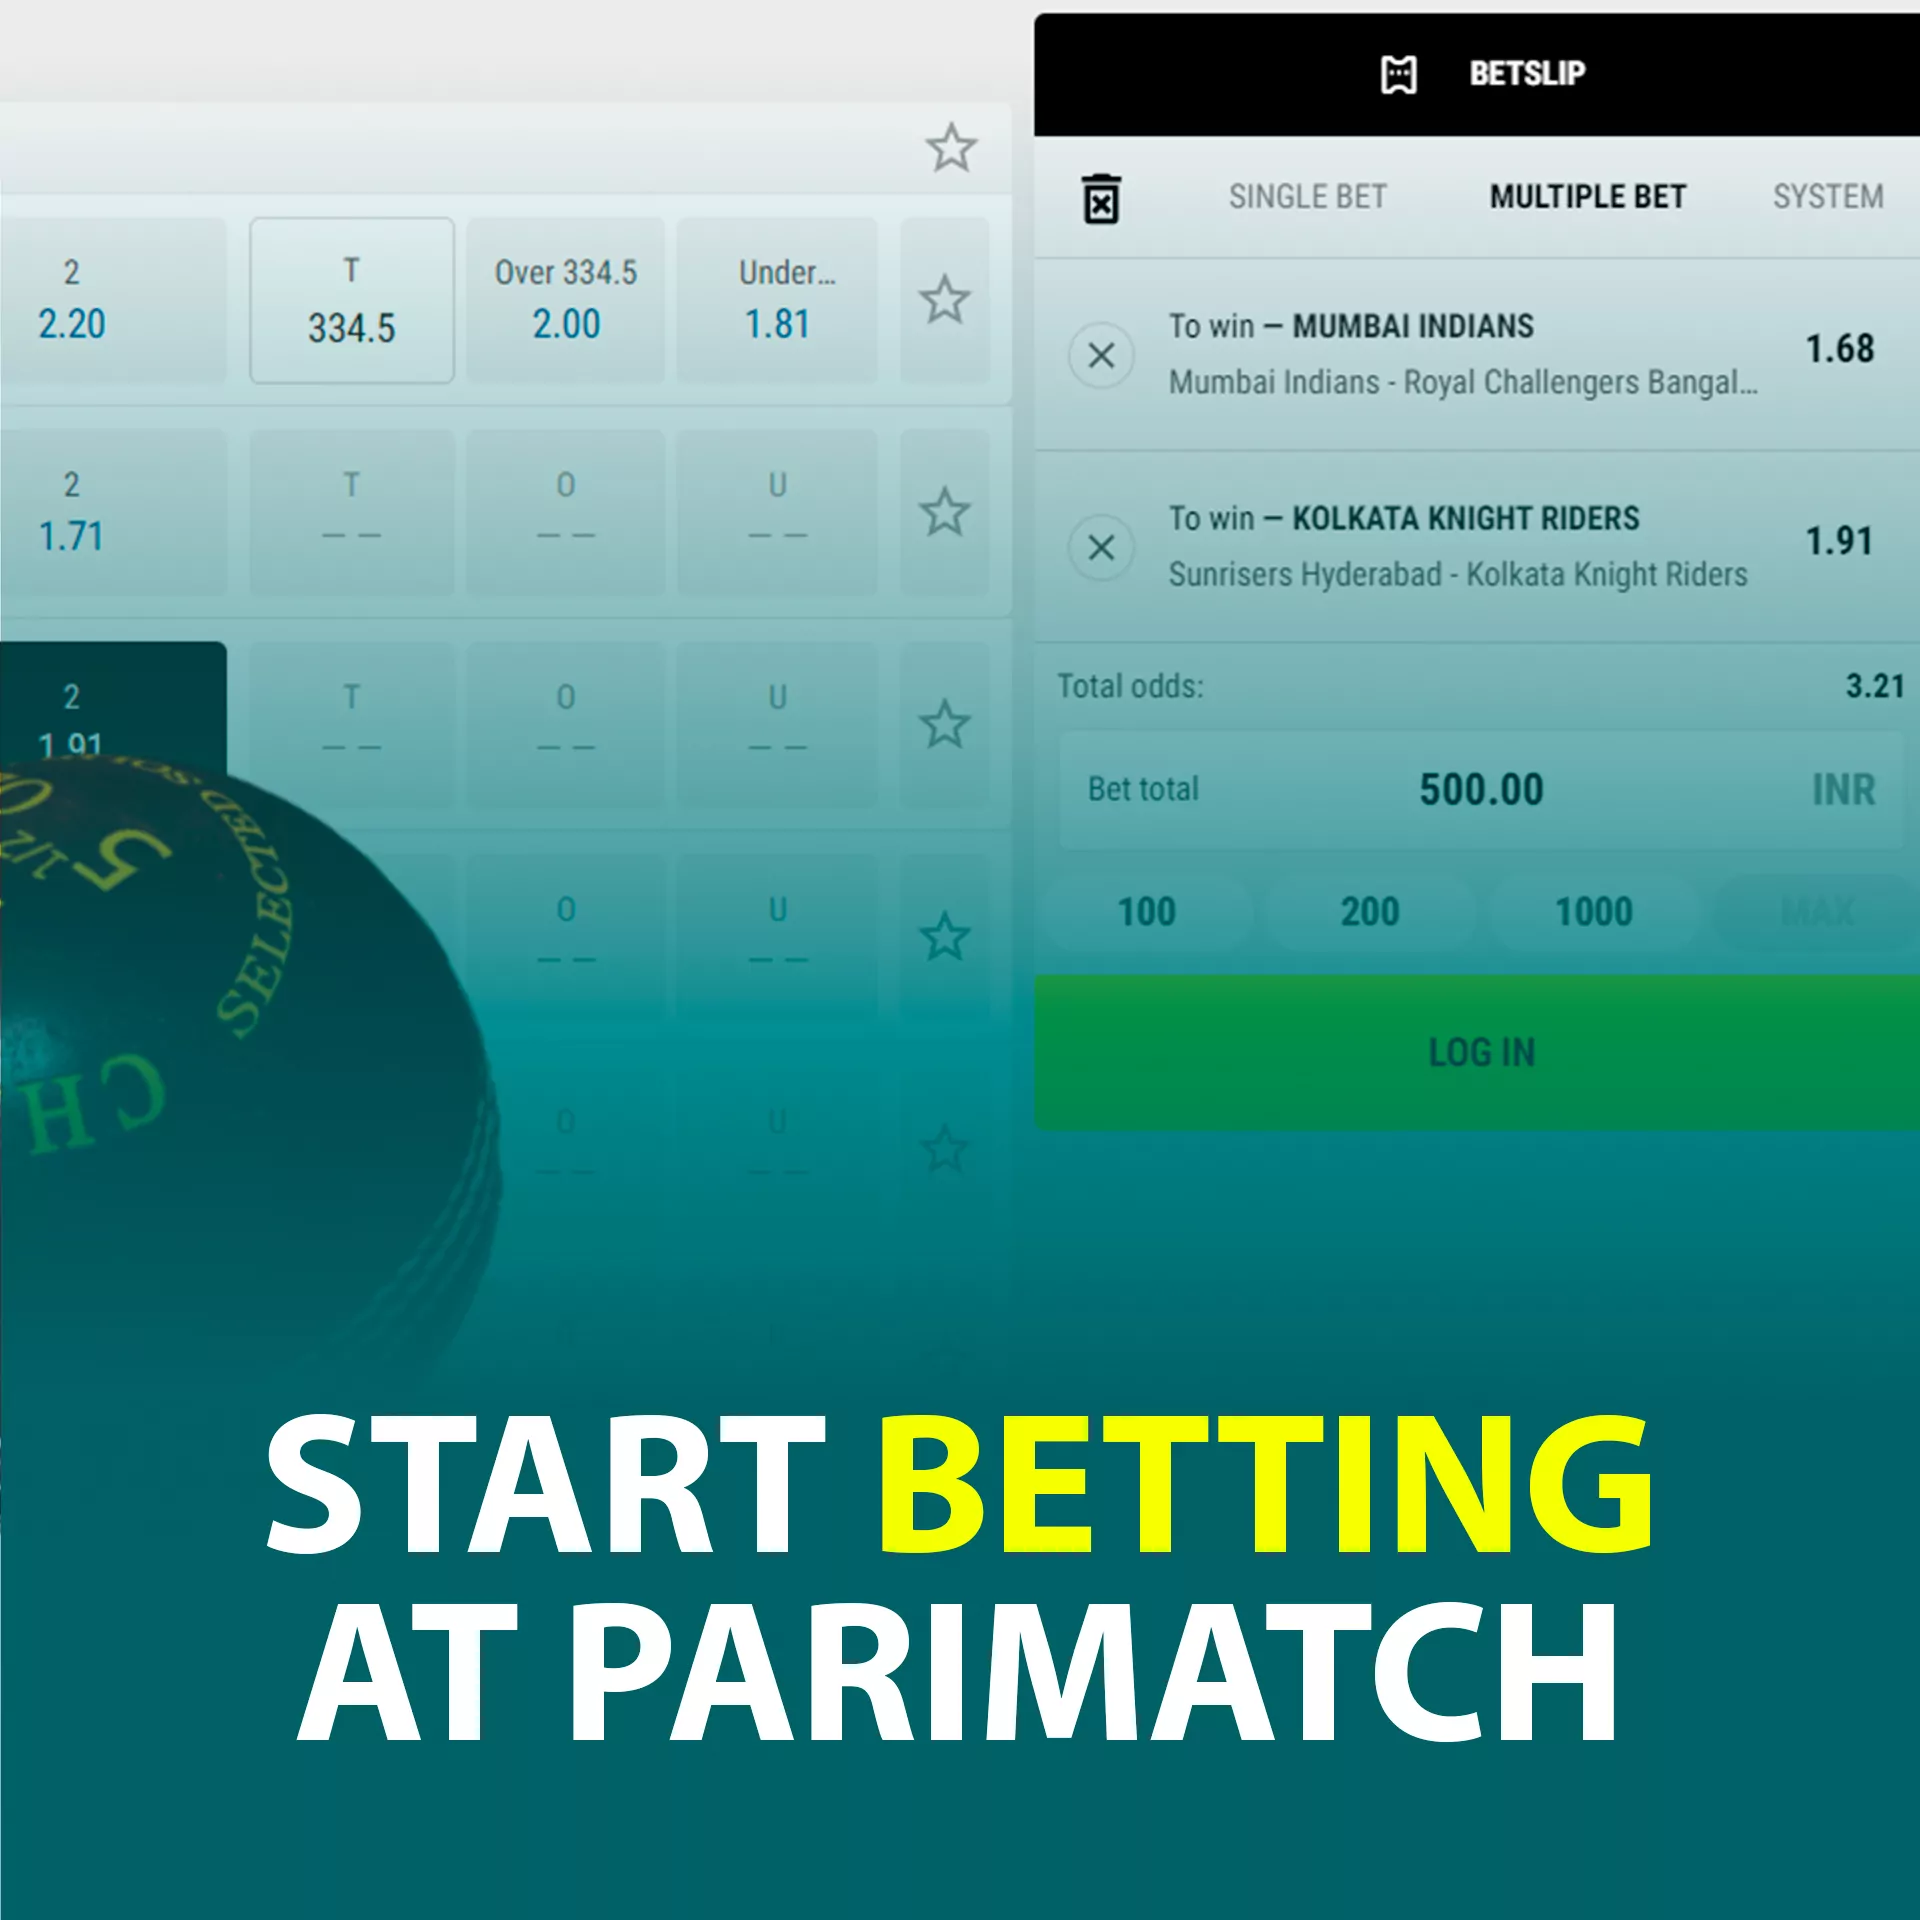 Choose your favorite sport and match, then place a bet